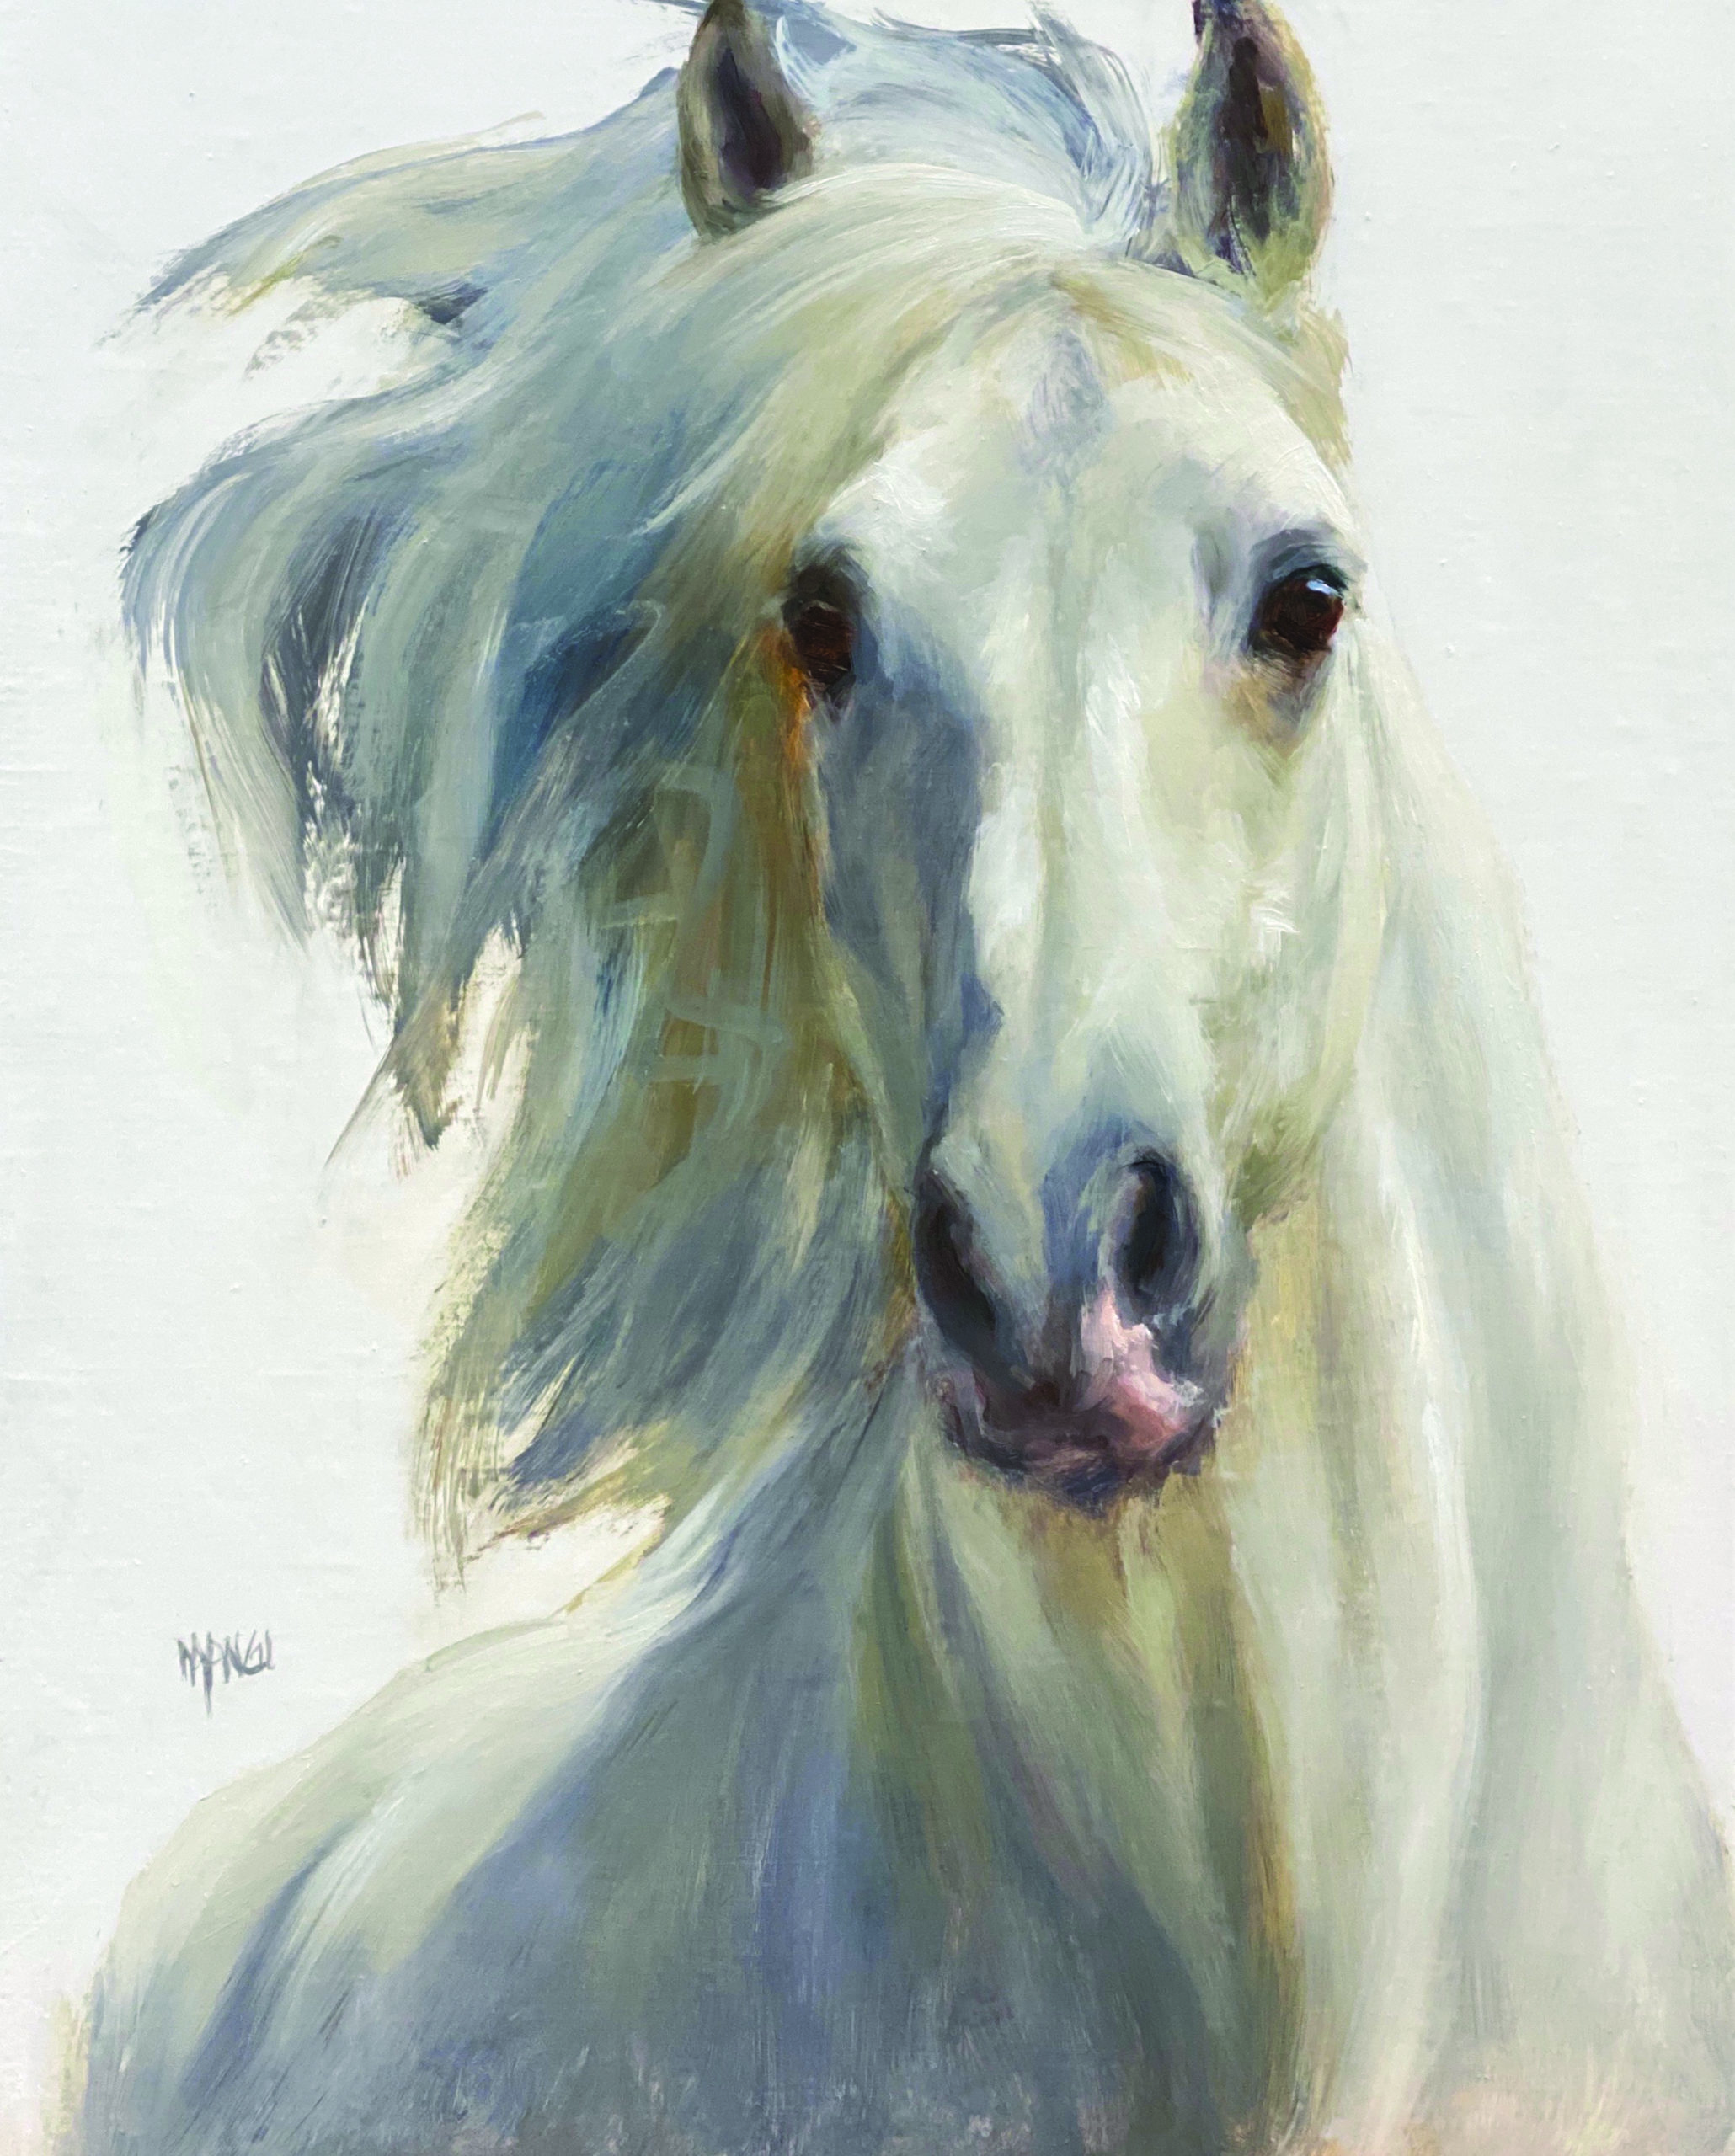 How to paint horse portraits